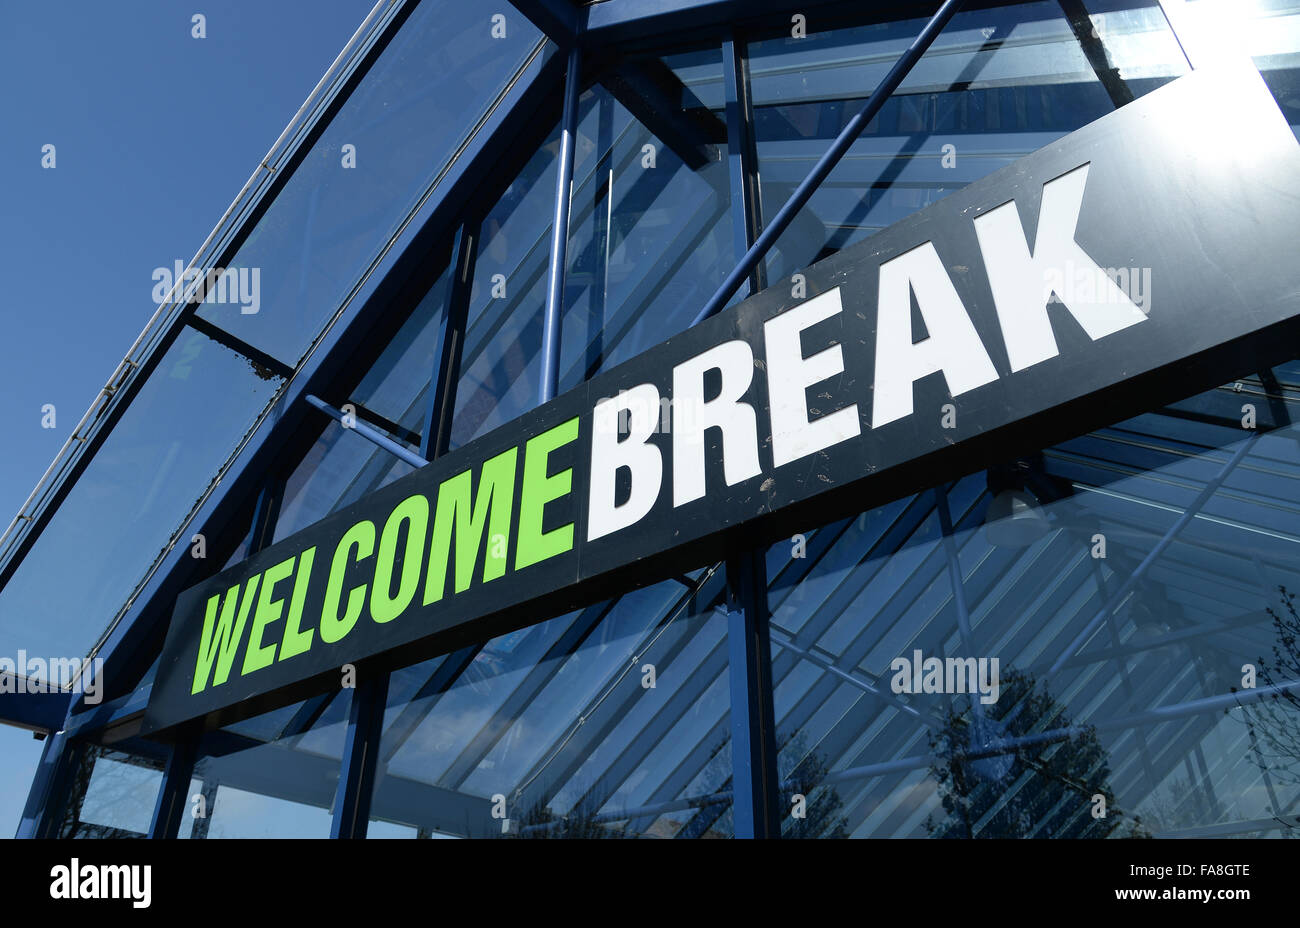 Welcome Break Motorway service station on the southbound M40 in Warwickshire Stock Photo